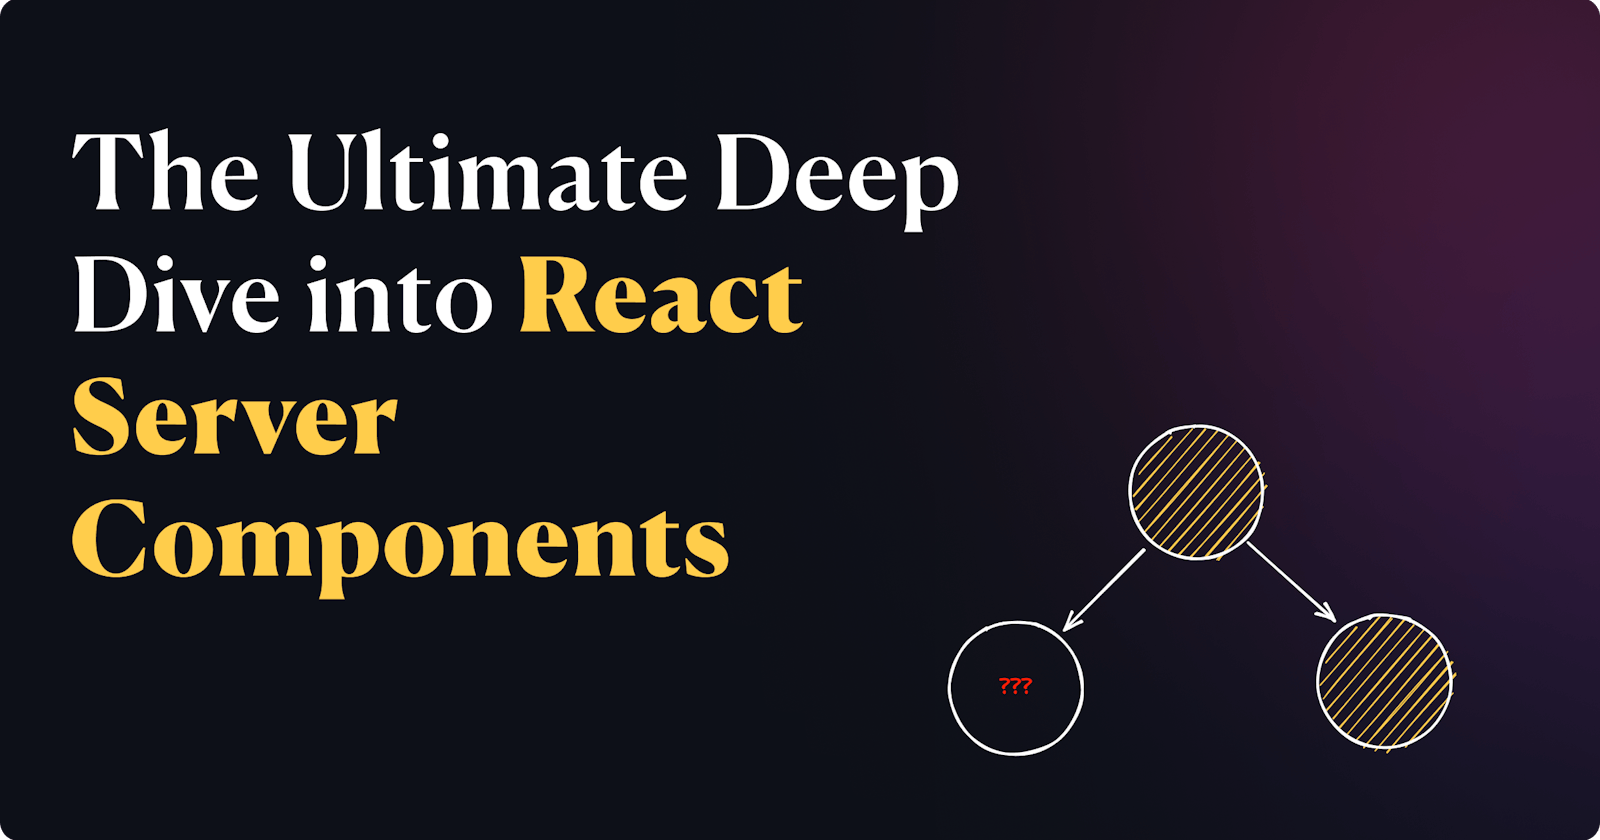 The Ultimate Deep Dive into React Server Components (Revised)